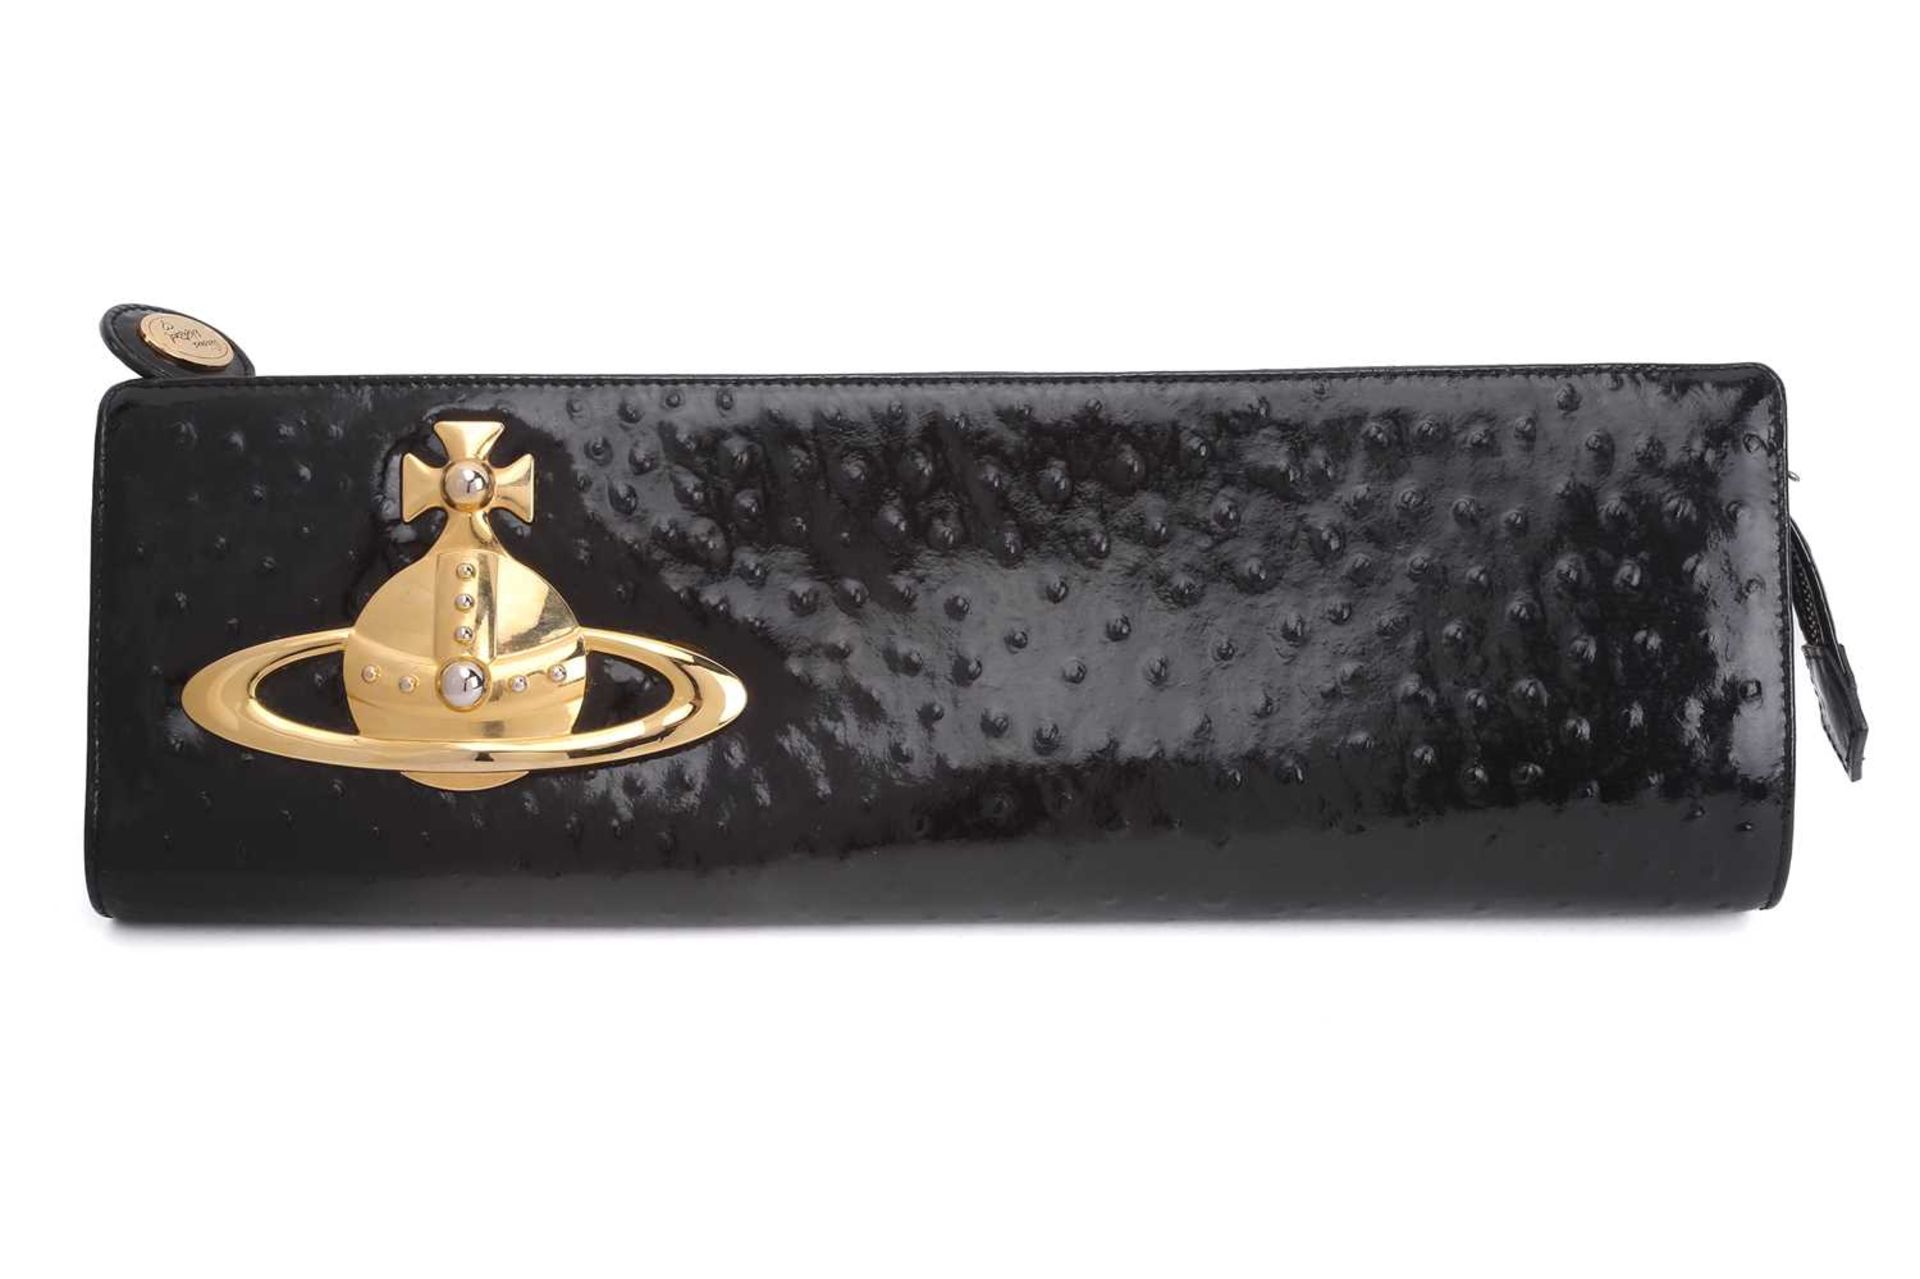 Vivienne Westwood - an extra long clutch in black patent mock ostrich leather, embellished with